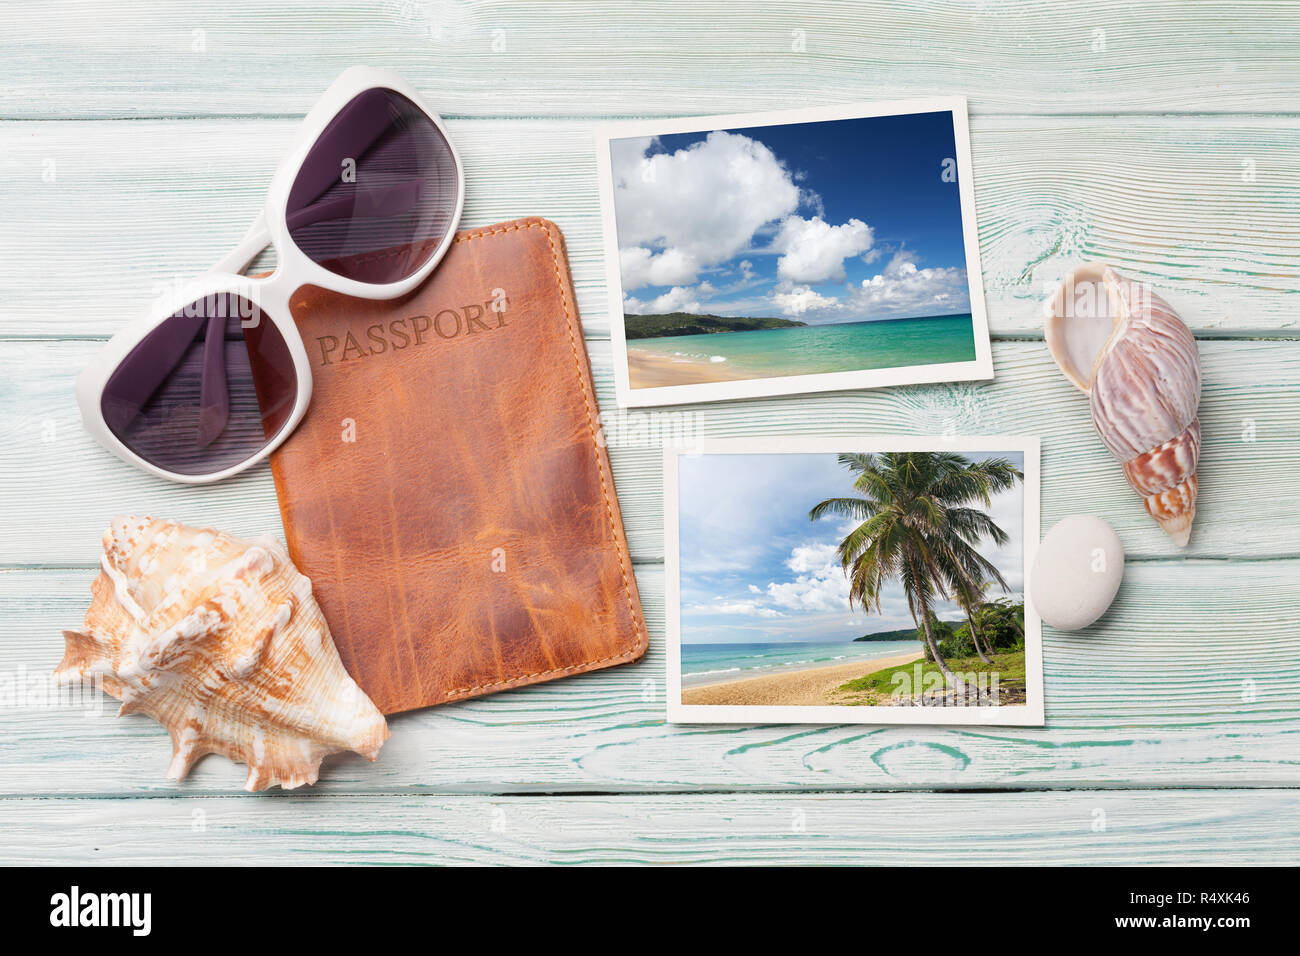 Travel vacation table concept with sunglasses, passport and summer photos on wooden table. Top view. Flat lay. Photos taken by me Stock Photo